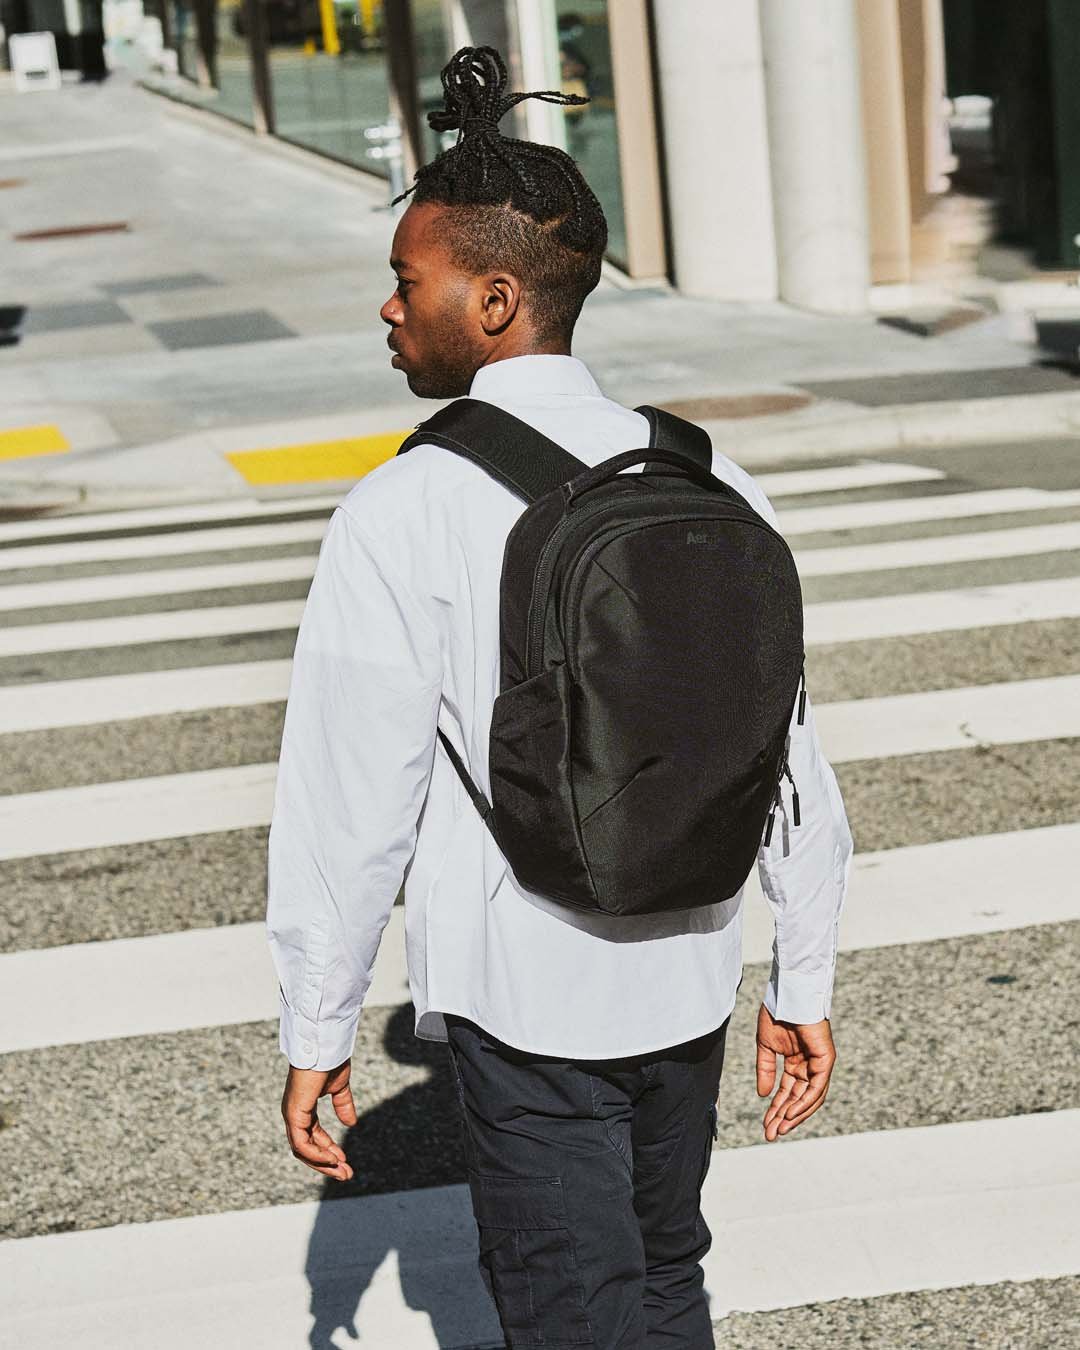 Aer | Modern gym bags, best travel backpacks, and laptop work 